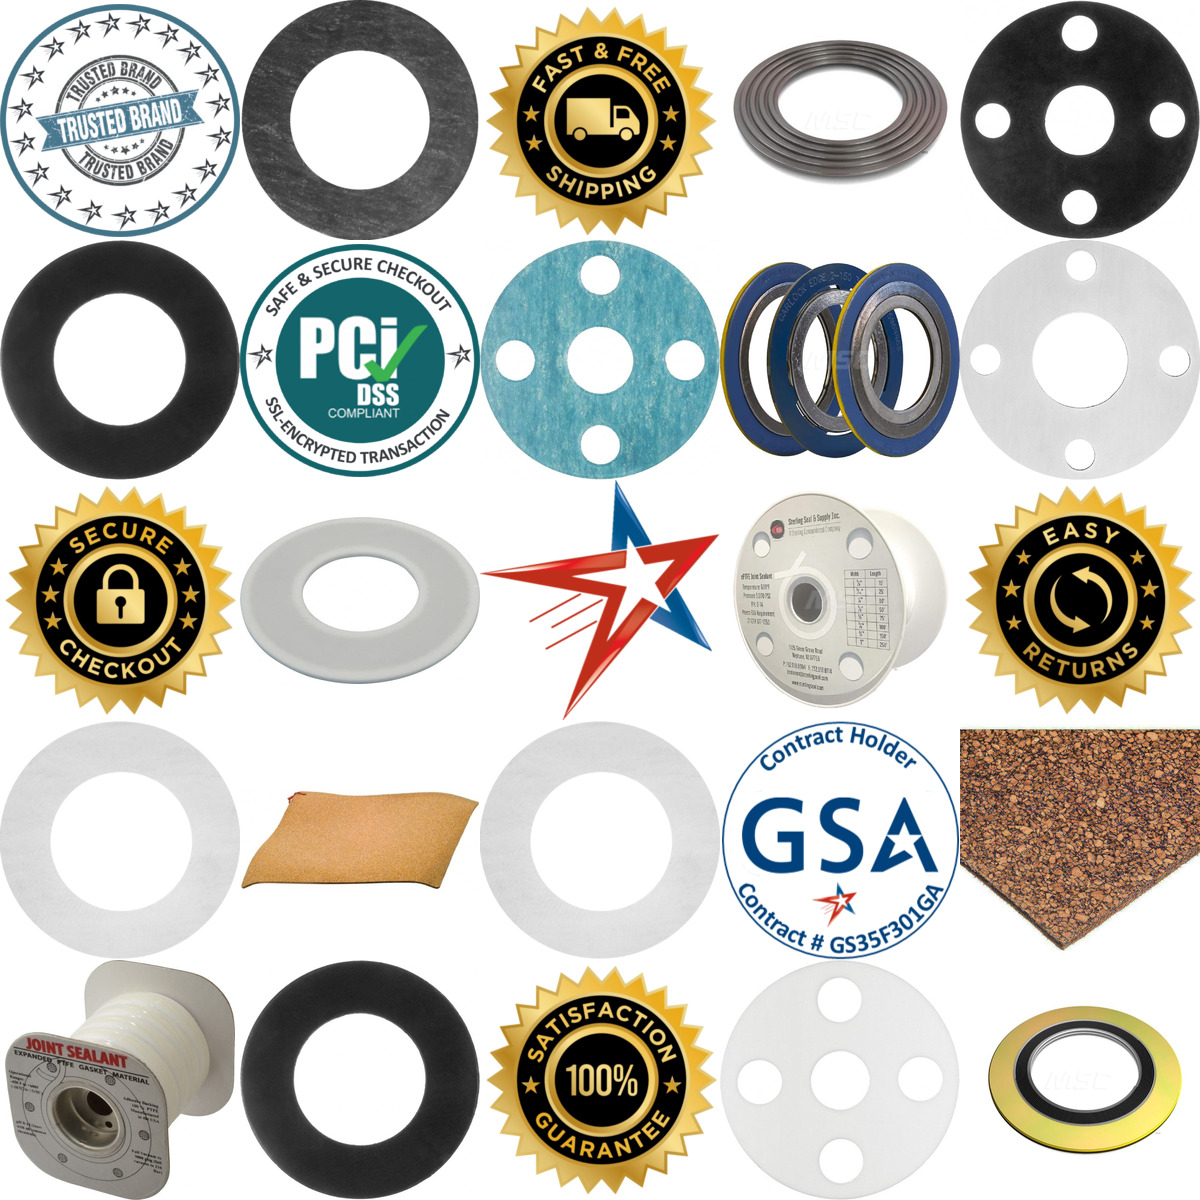 A selection of Gasketing products on GoVets